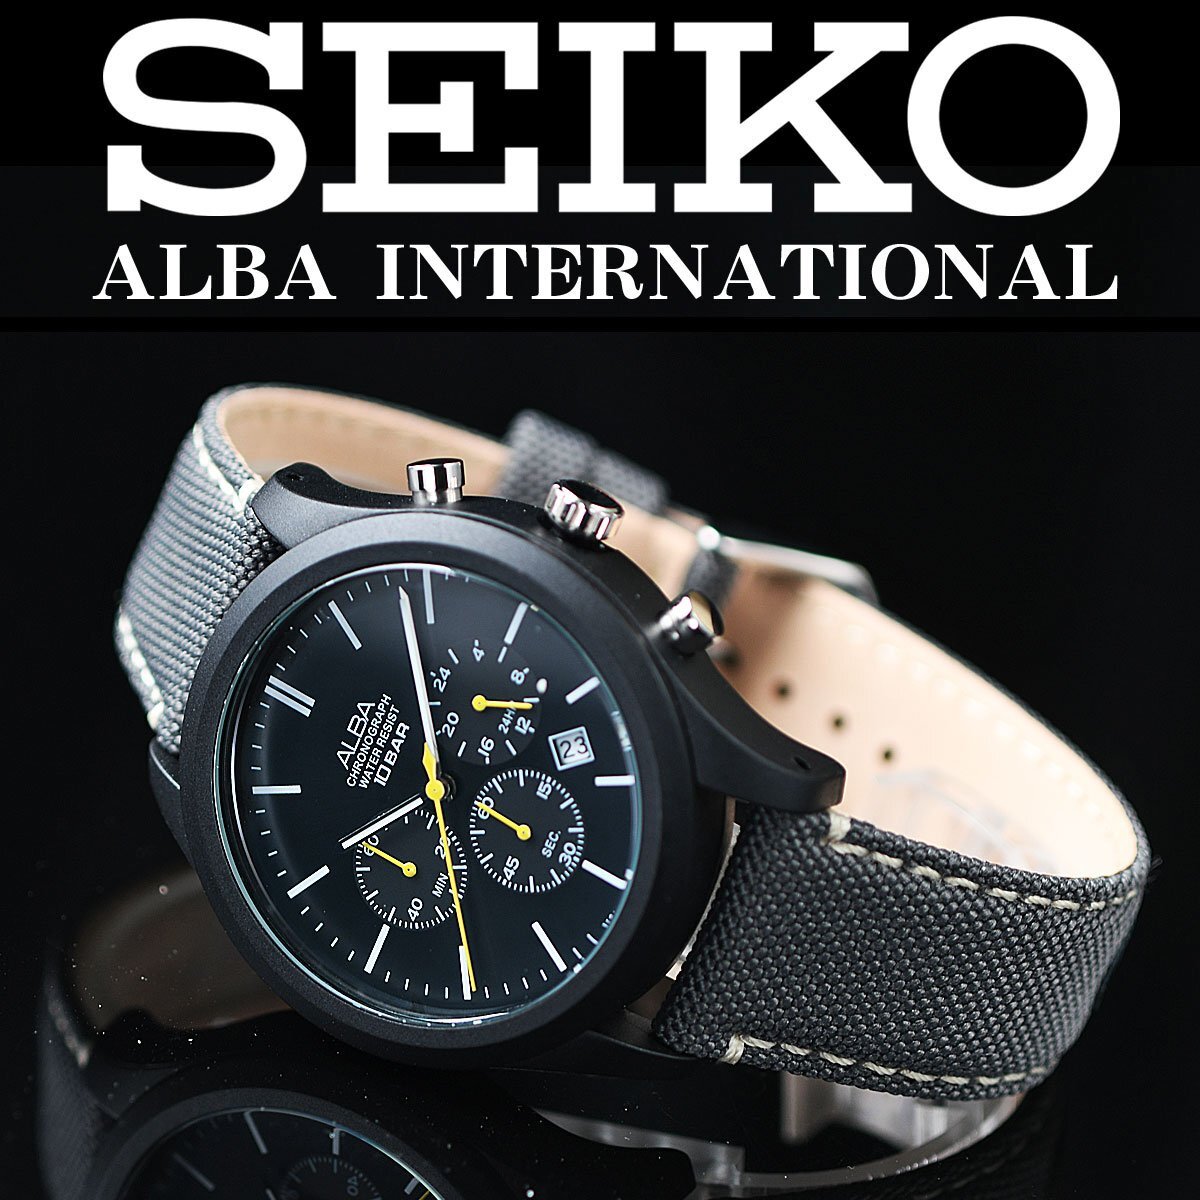  new goods Seiko ALBA reimport .. khaki color military 100m waterproof chronograph new goods men's ultra rare hard-to-find Alba not yet sale in Japan SEIKO